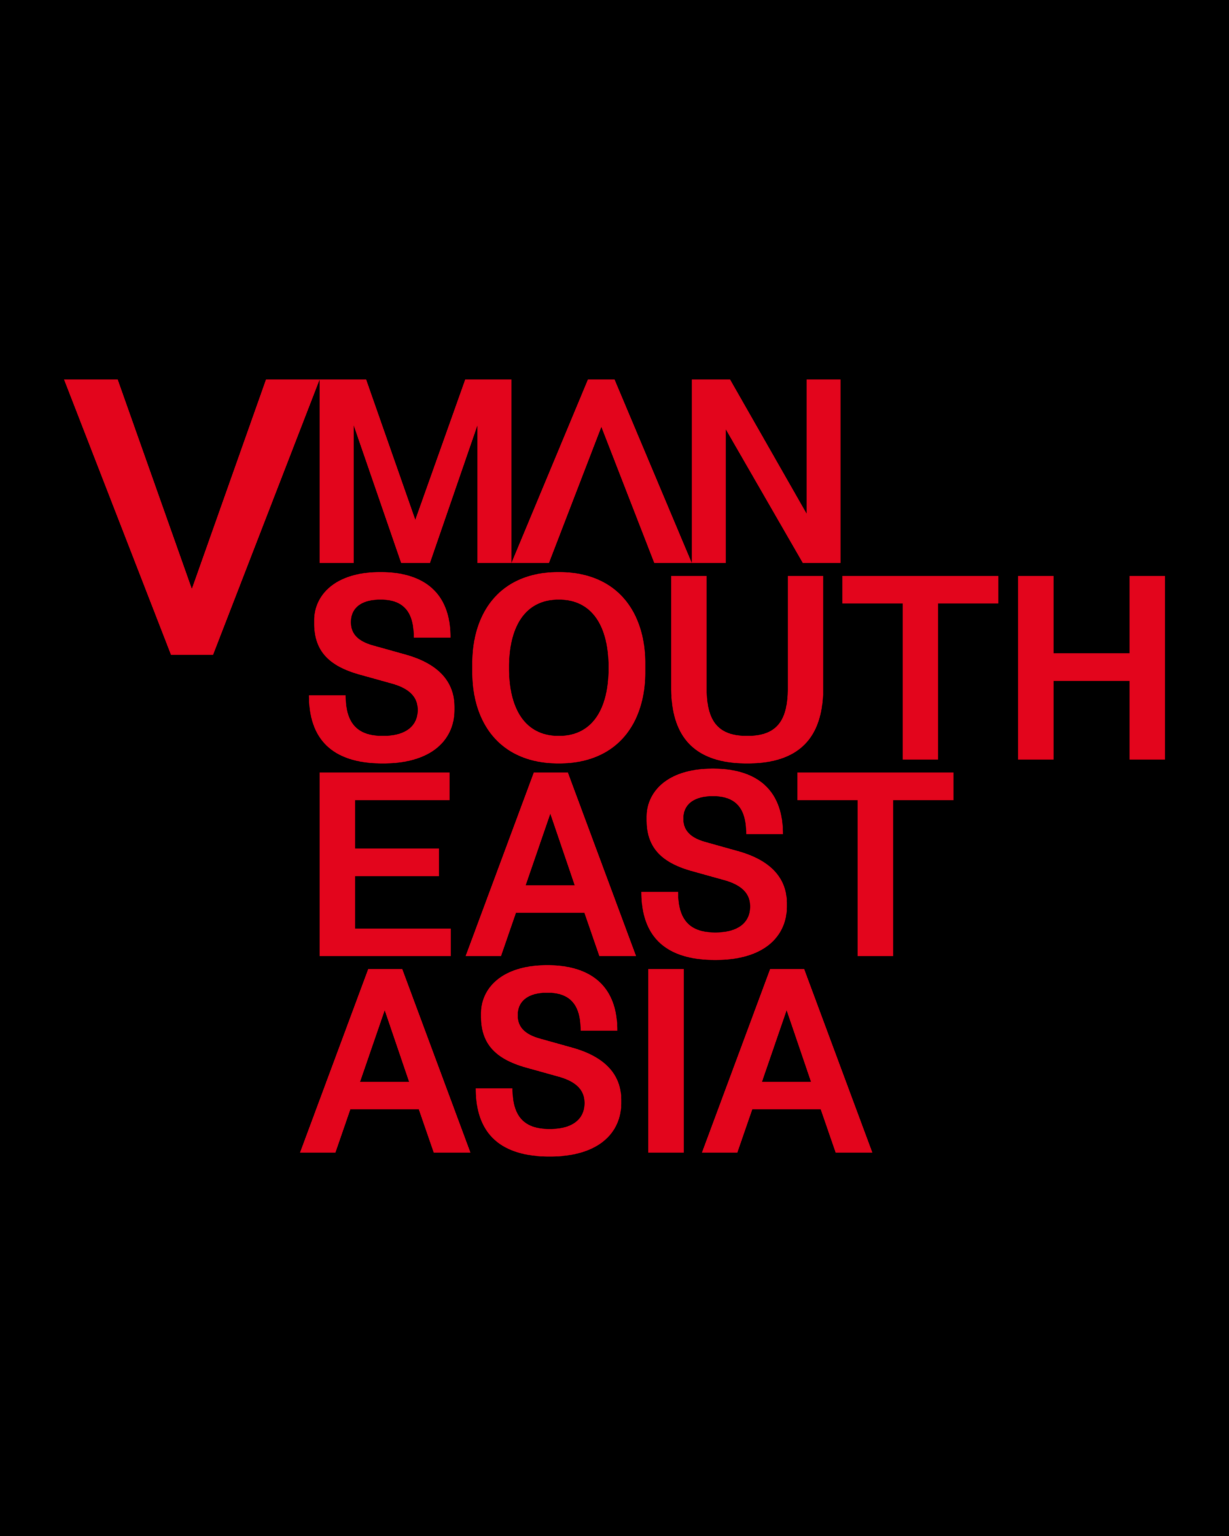 VMAN SEA to Launch with One Mega Group, Inc. in the Philippines